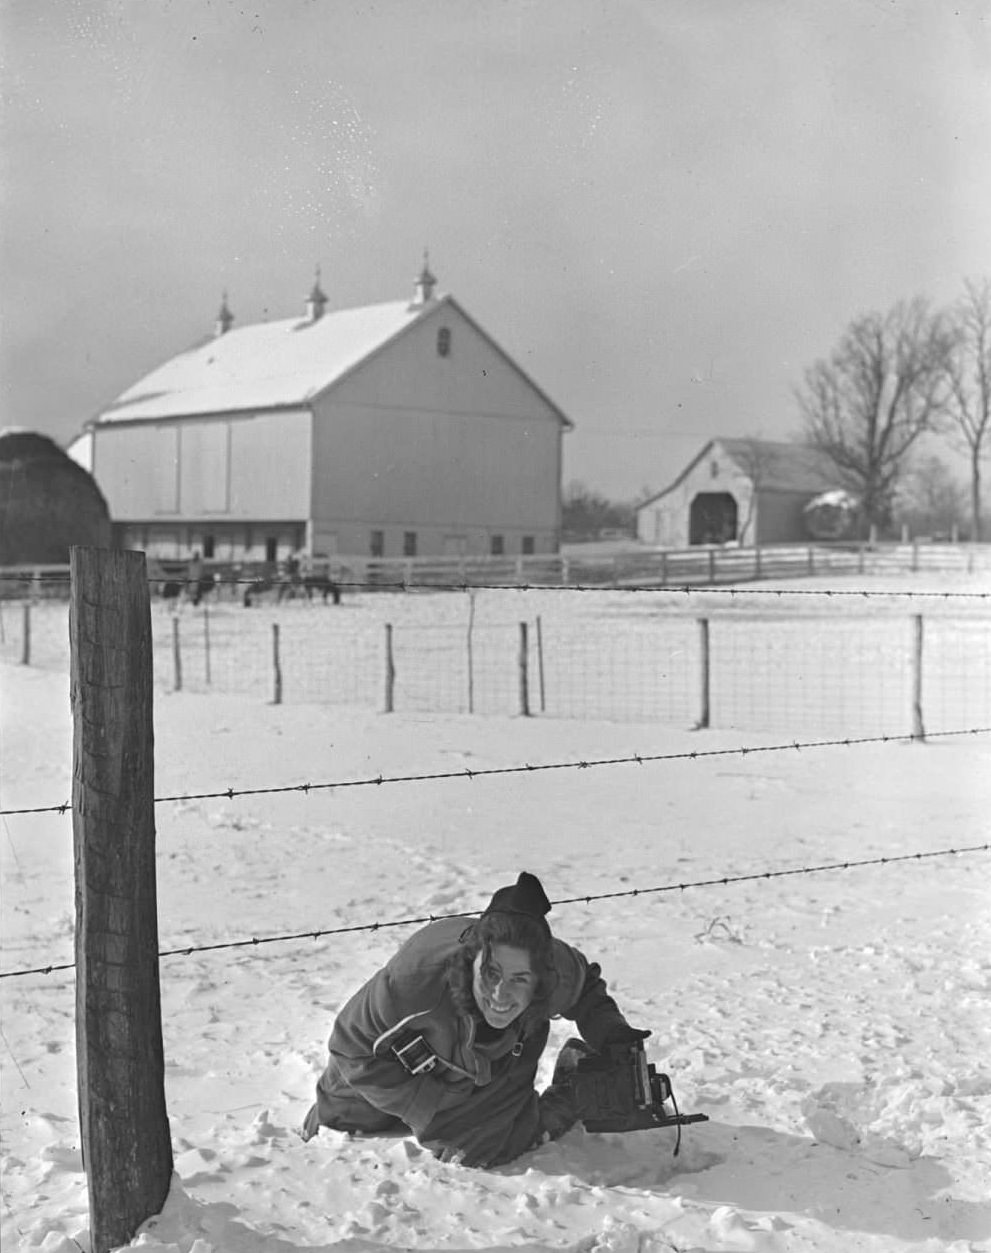 Marion Post Wolcott with Rolleiflex camera, Montgomery County, Maryland, January 1940.